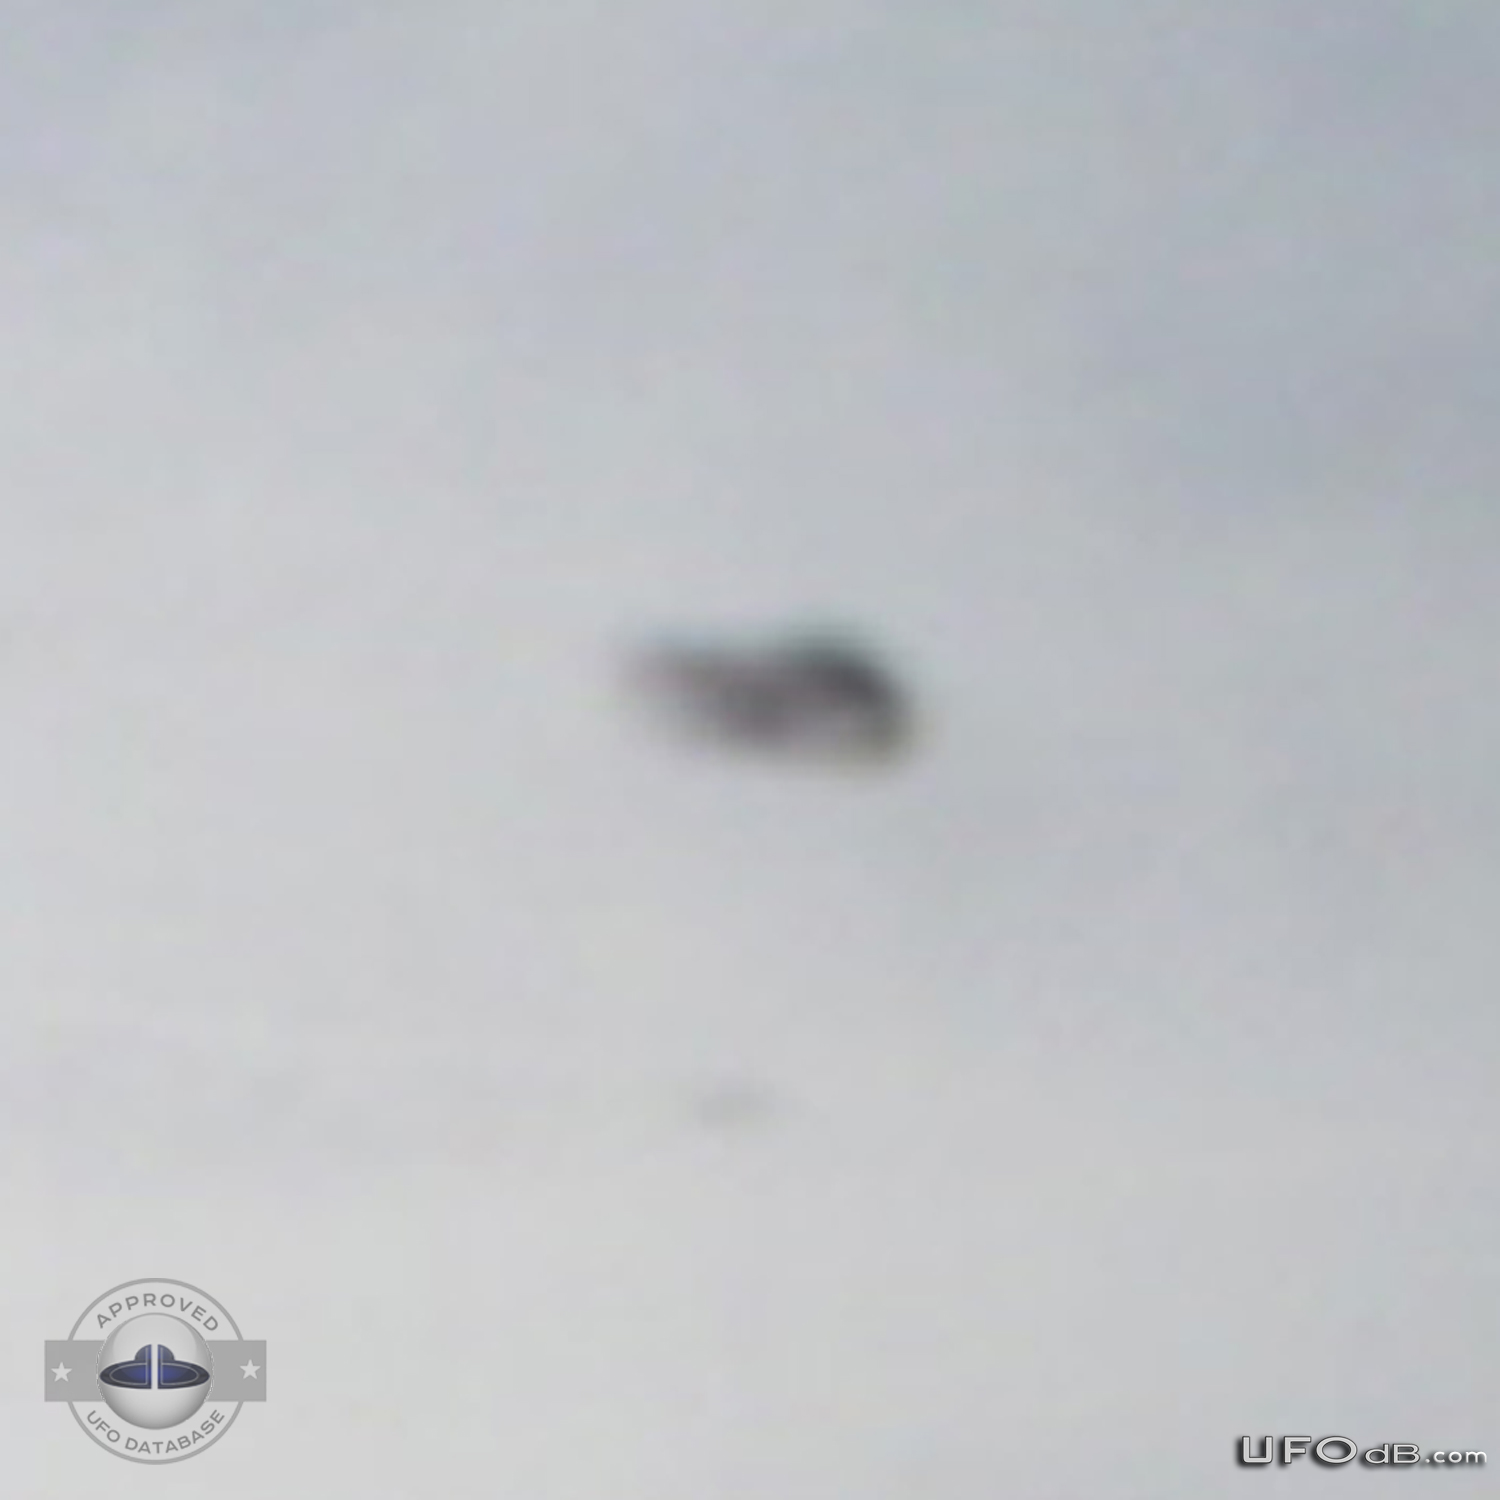 KLM Airplane passenger see UFO near wing | Amsterdam, Netherlands 2006 UFO Picture #255-5